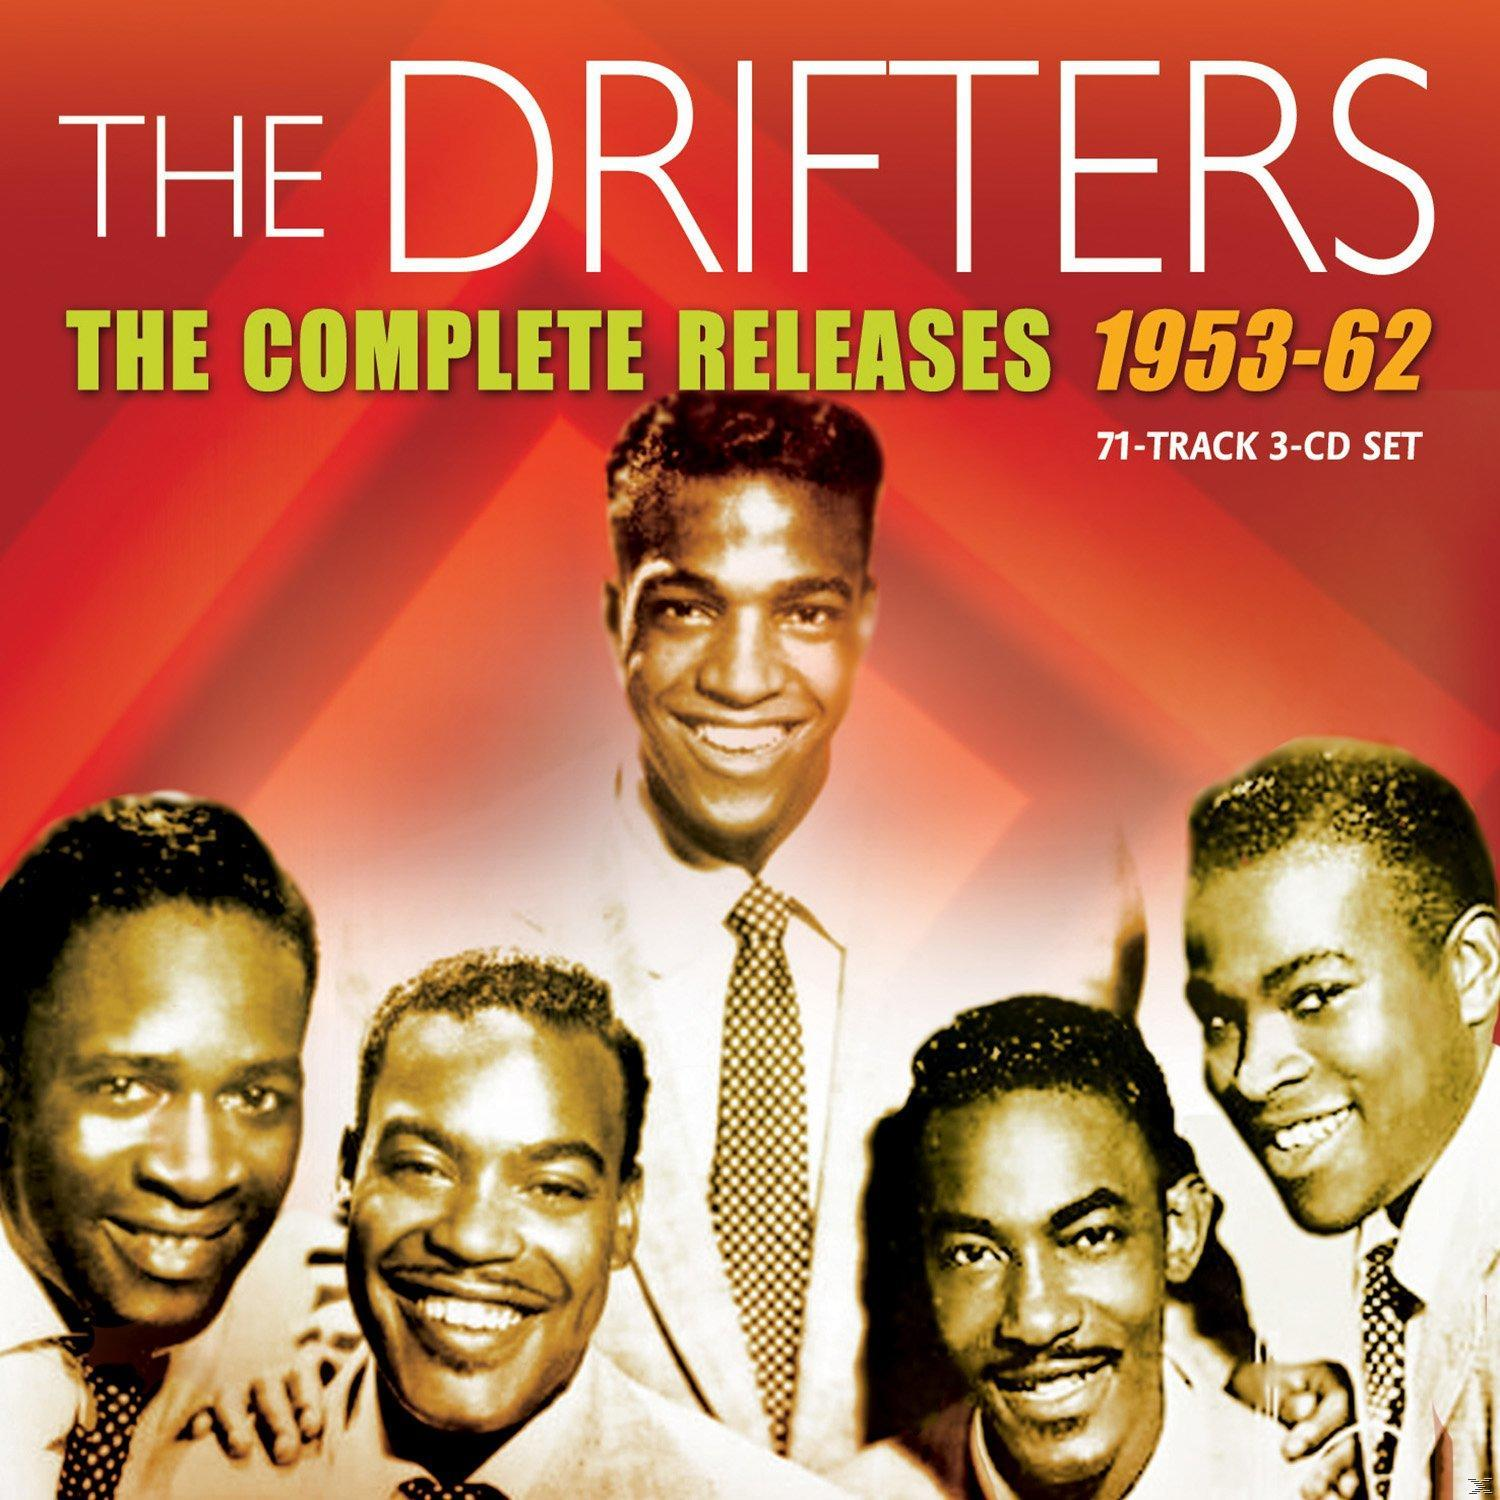 The Drifters Releases - 1953-62 (CD) - The Complete